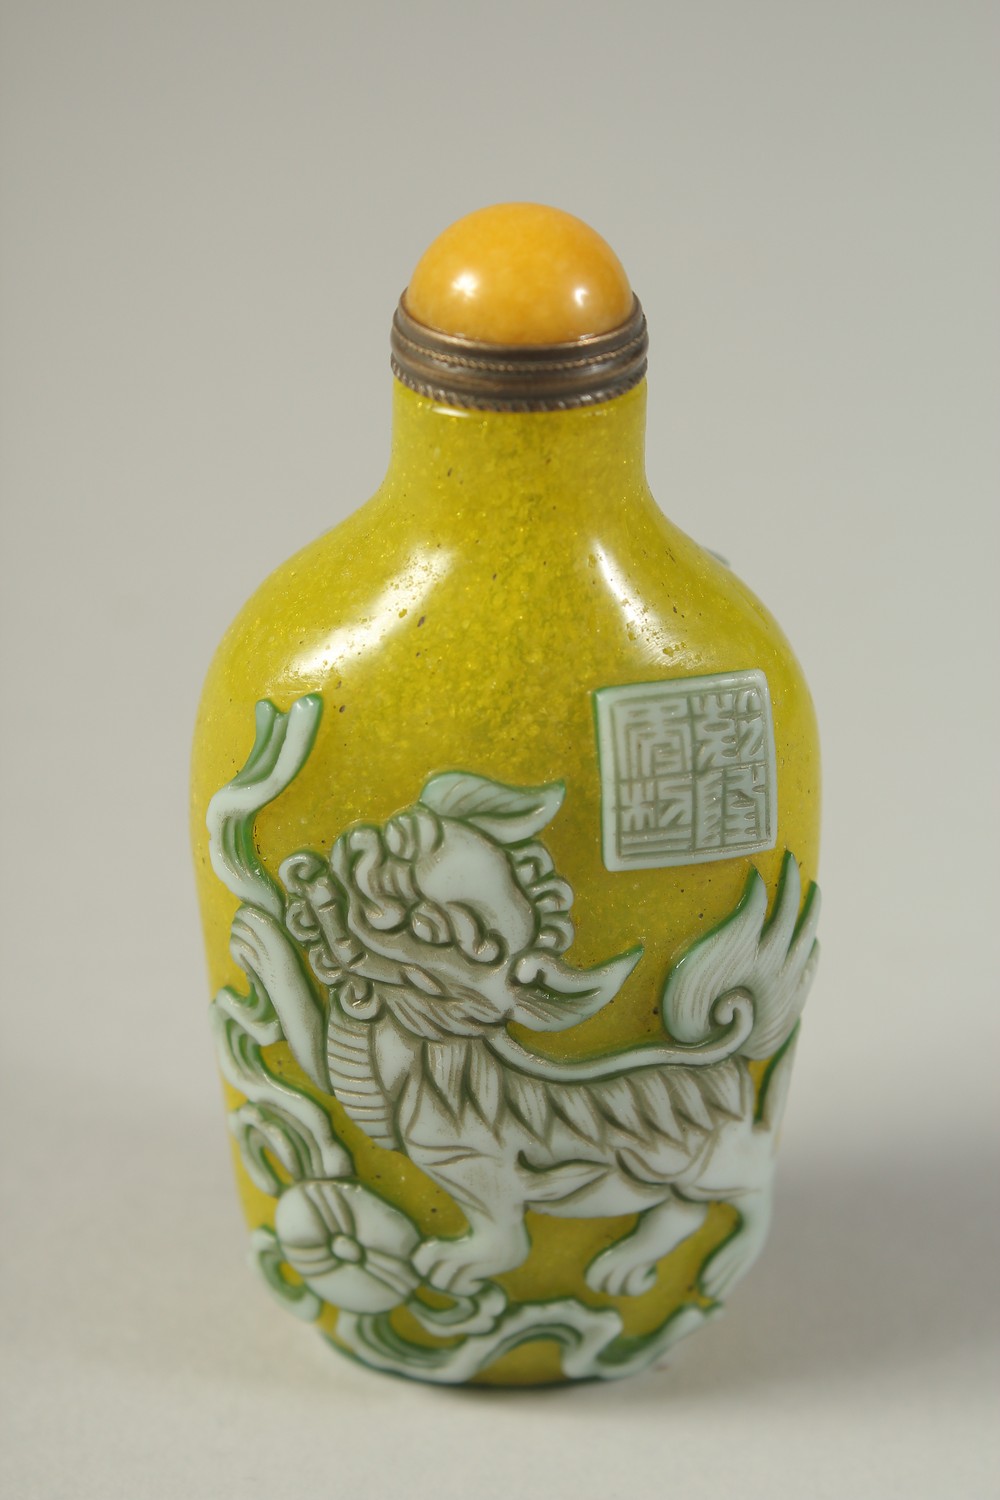 A CHINESE RELIEF-DECORATED FOO DOG SNUFF BOTTLE AND STOPPER / SPOON, 8cm high. - Image 2 of 4